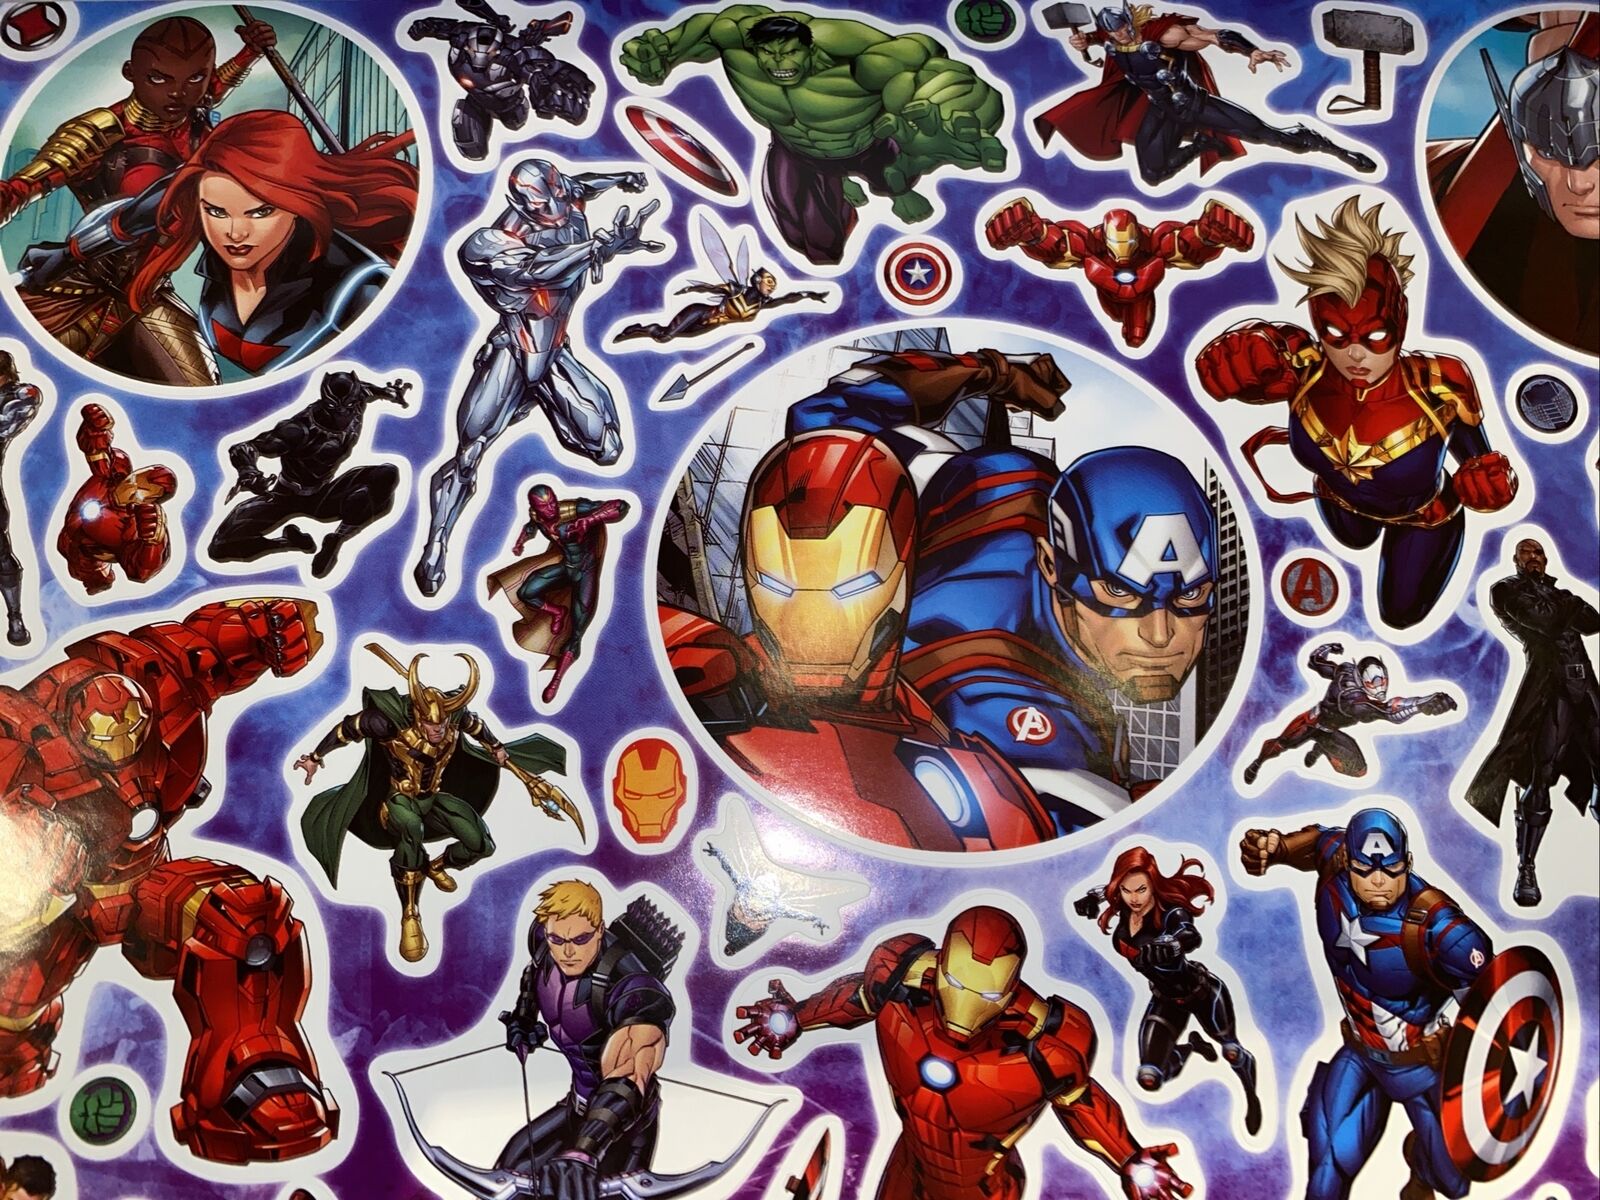 MARVEL AVENGERS Sticker Activity Pad, Over 1,000 Stickers - SHIPS FREE –  The Odd Assortment